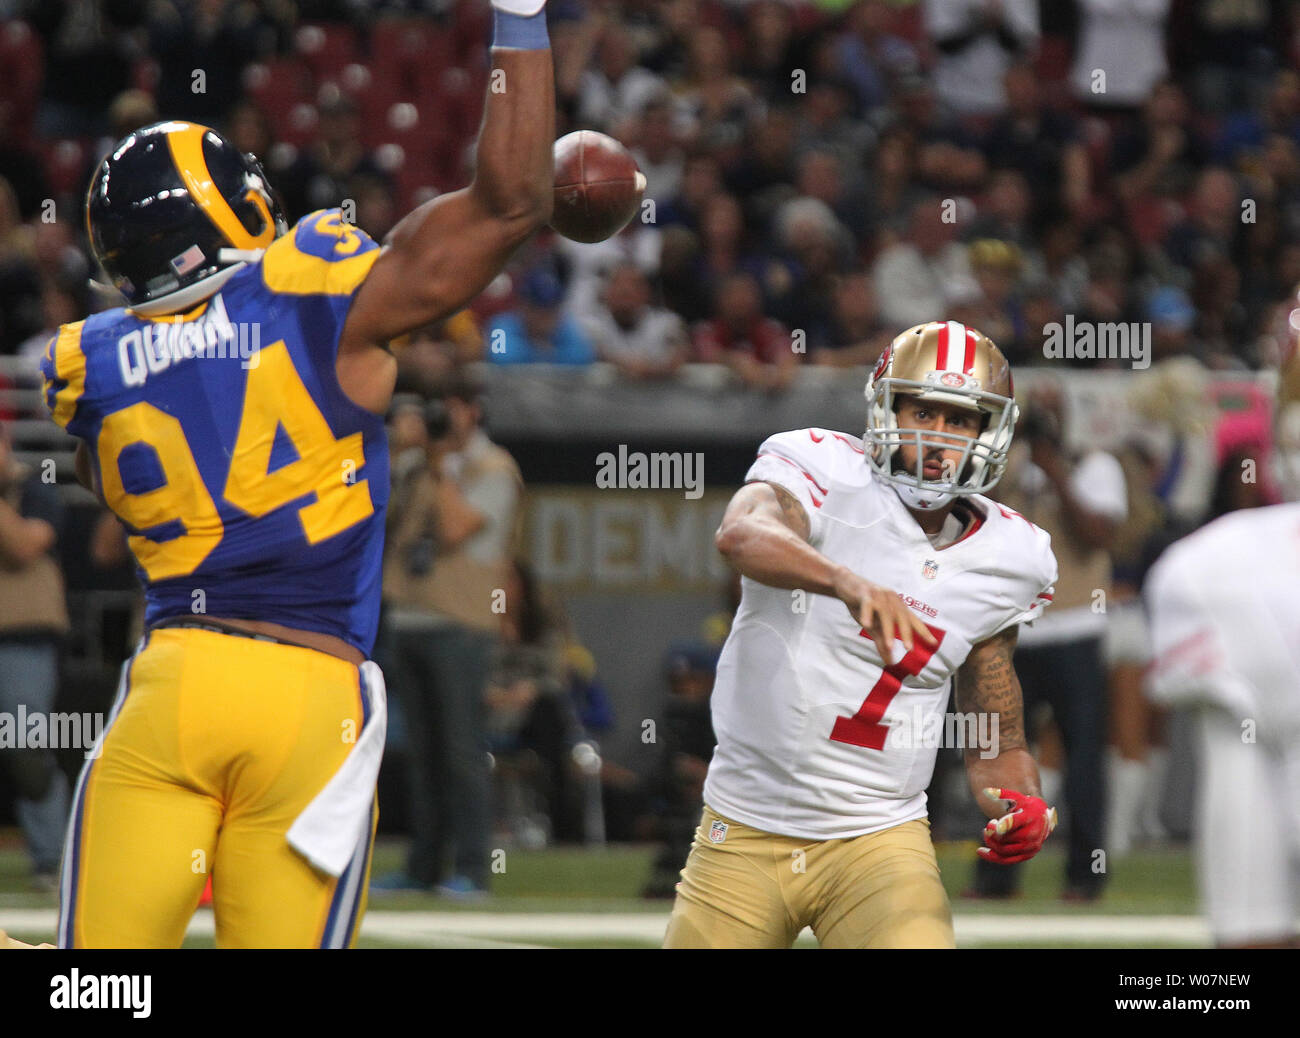 St. Louis Rams Robert Quinn knocks down a pass by San Francisco 49ers quarterback Colin Kaepernick in the fourth quarter at the Edward Jones Dome in St. Louis on November 1, 2015. St. Louis defeated San Francisco   27-6. Photo by Bill Greenblatt/UPI Stock Photo